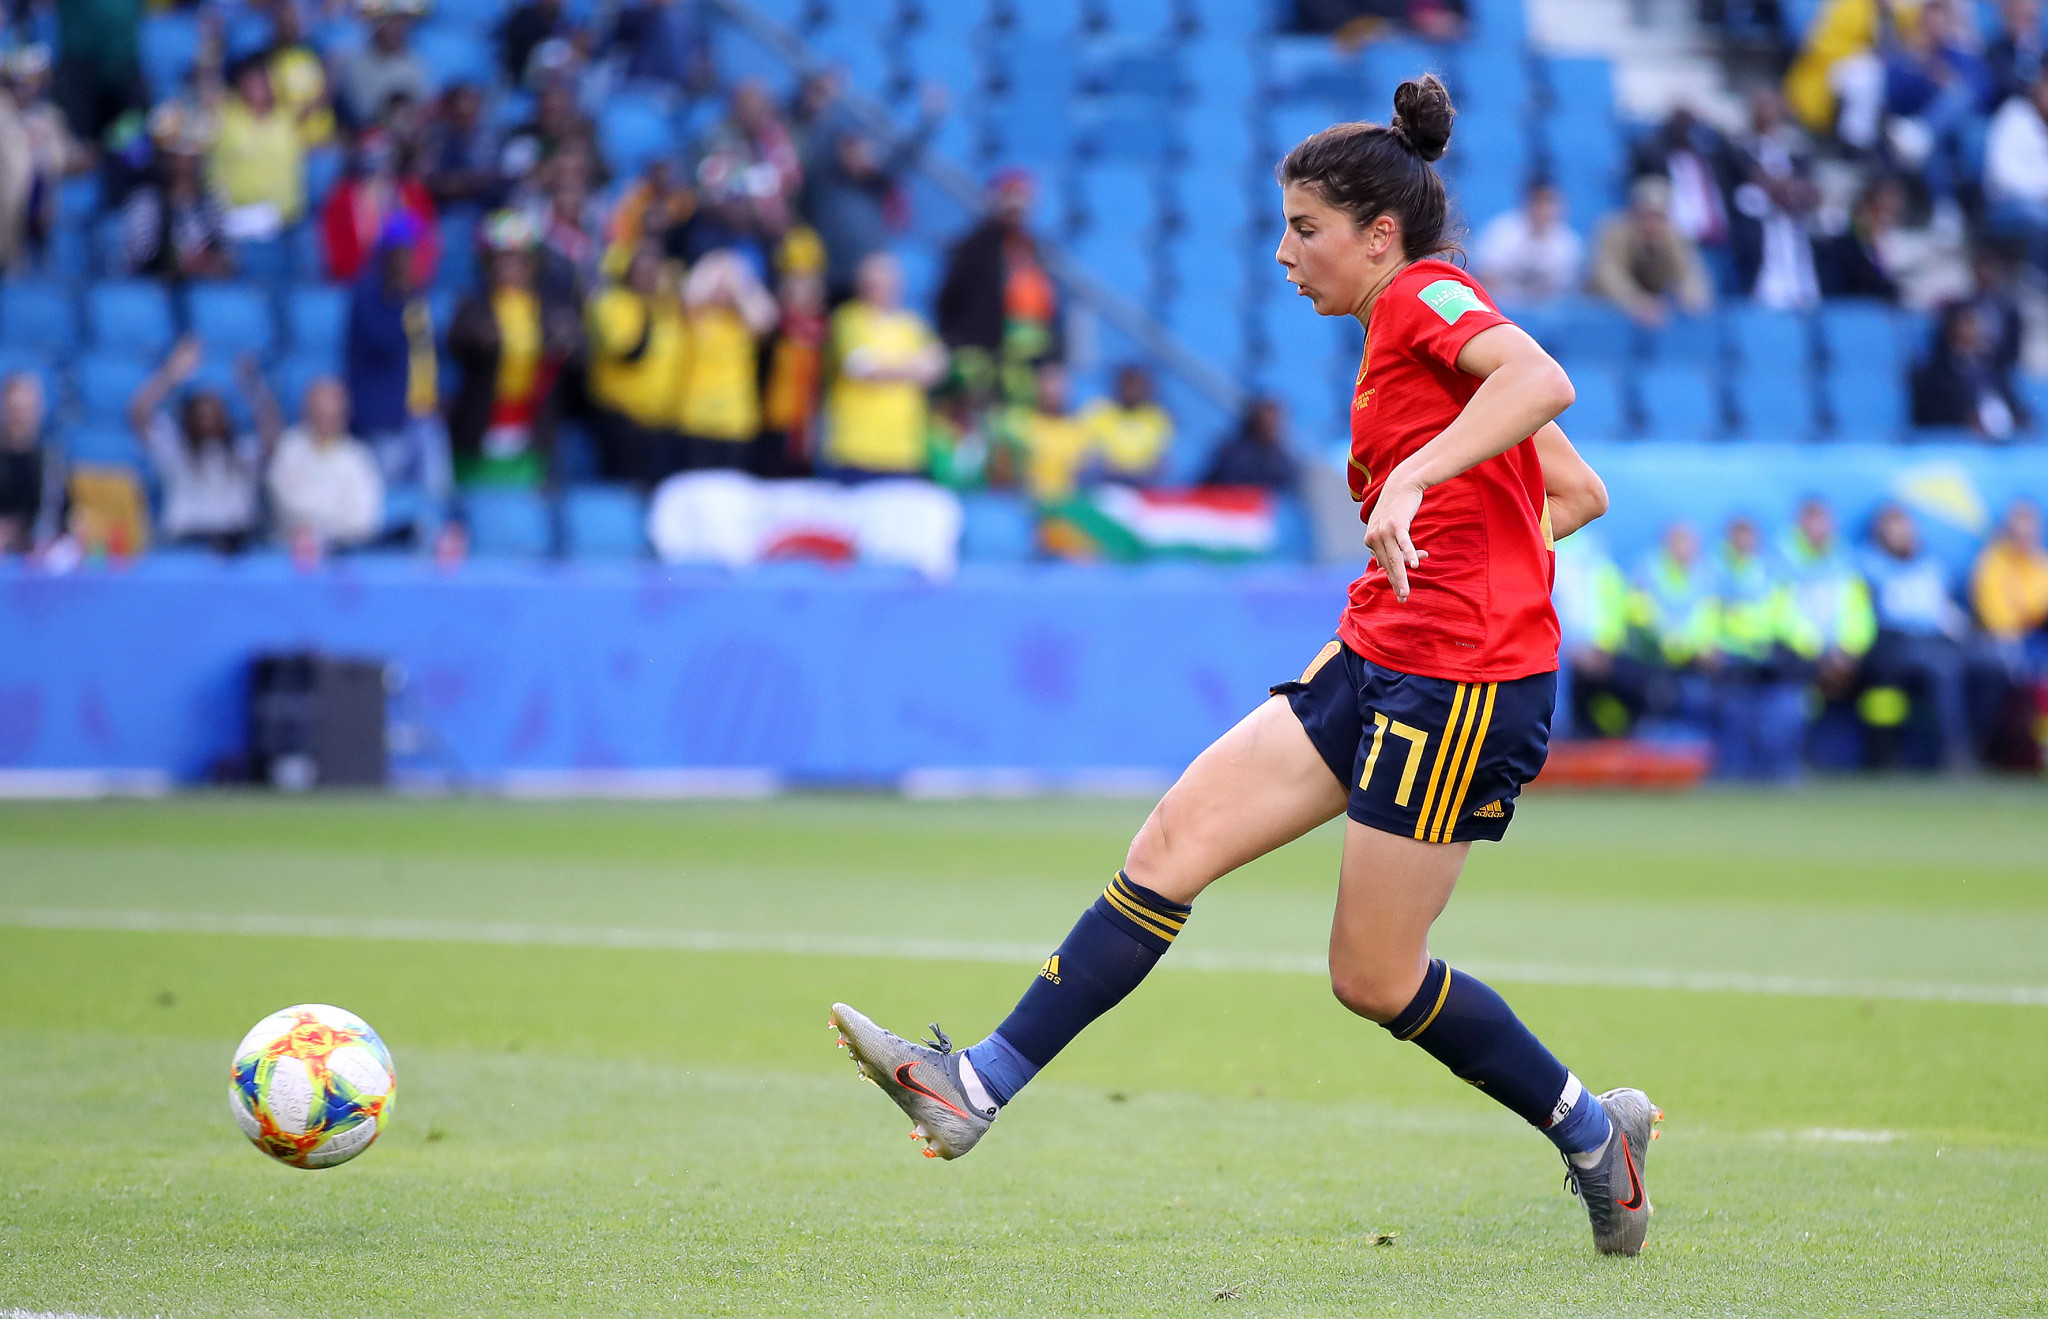 A late goal from Lucia Garcia gave Spain a 3-1 victory ©Getty Images